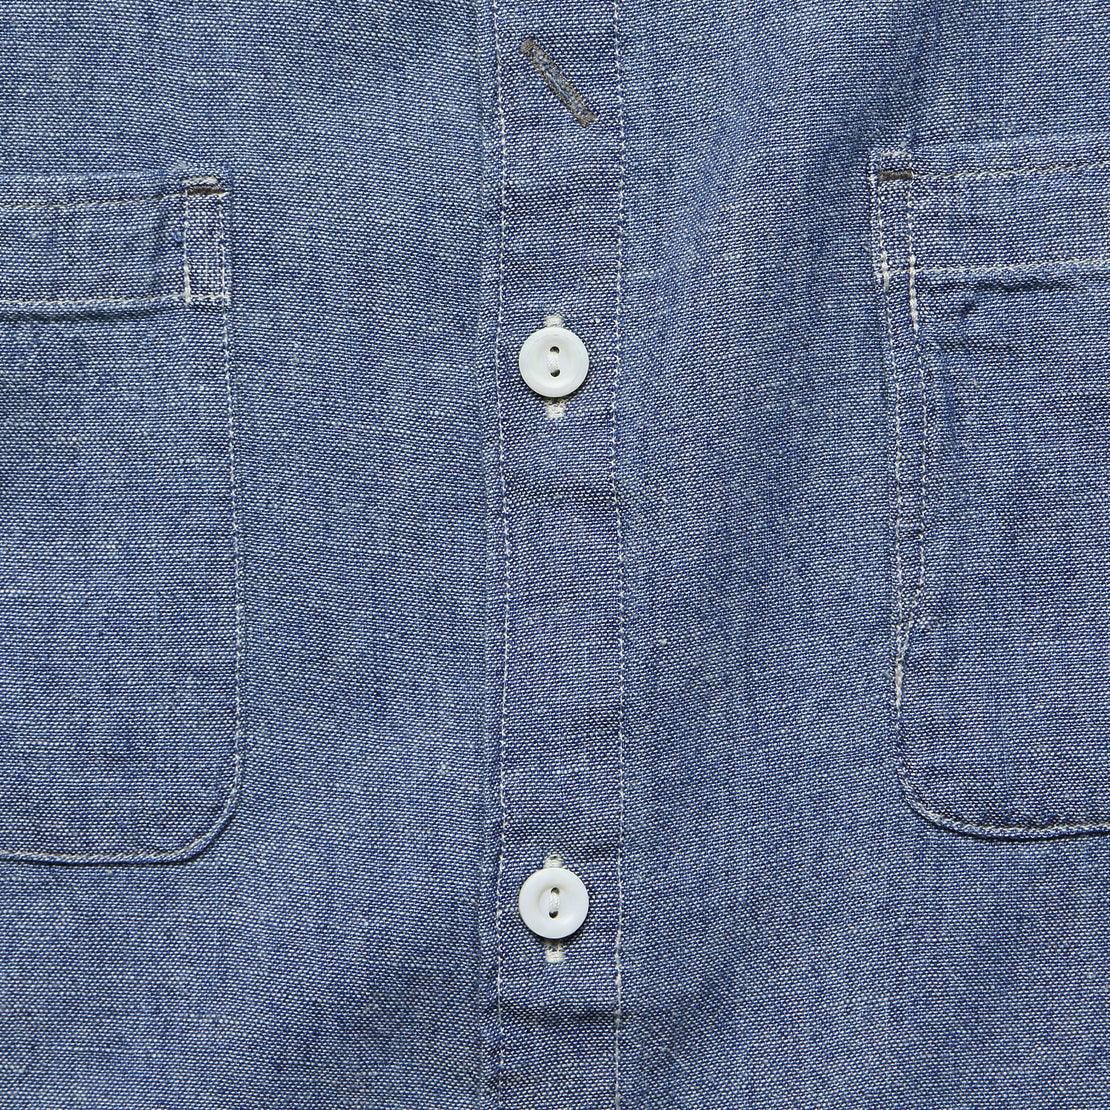 Weiland Band Collar Shirt - Indigo Chambray - RRL - STAG Provisions - Tops - L/S Woven - Solid